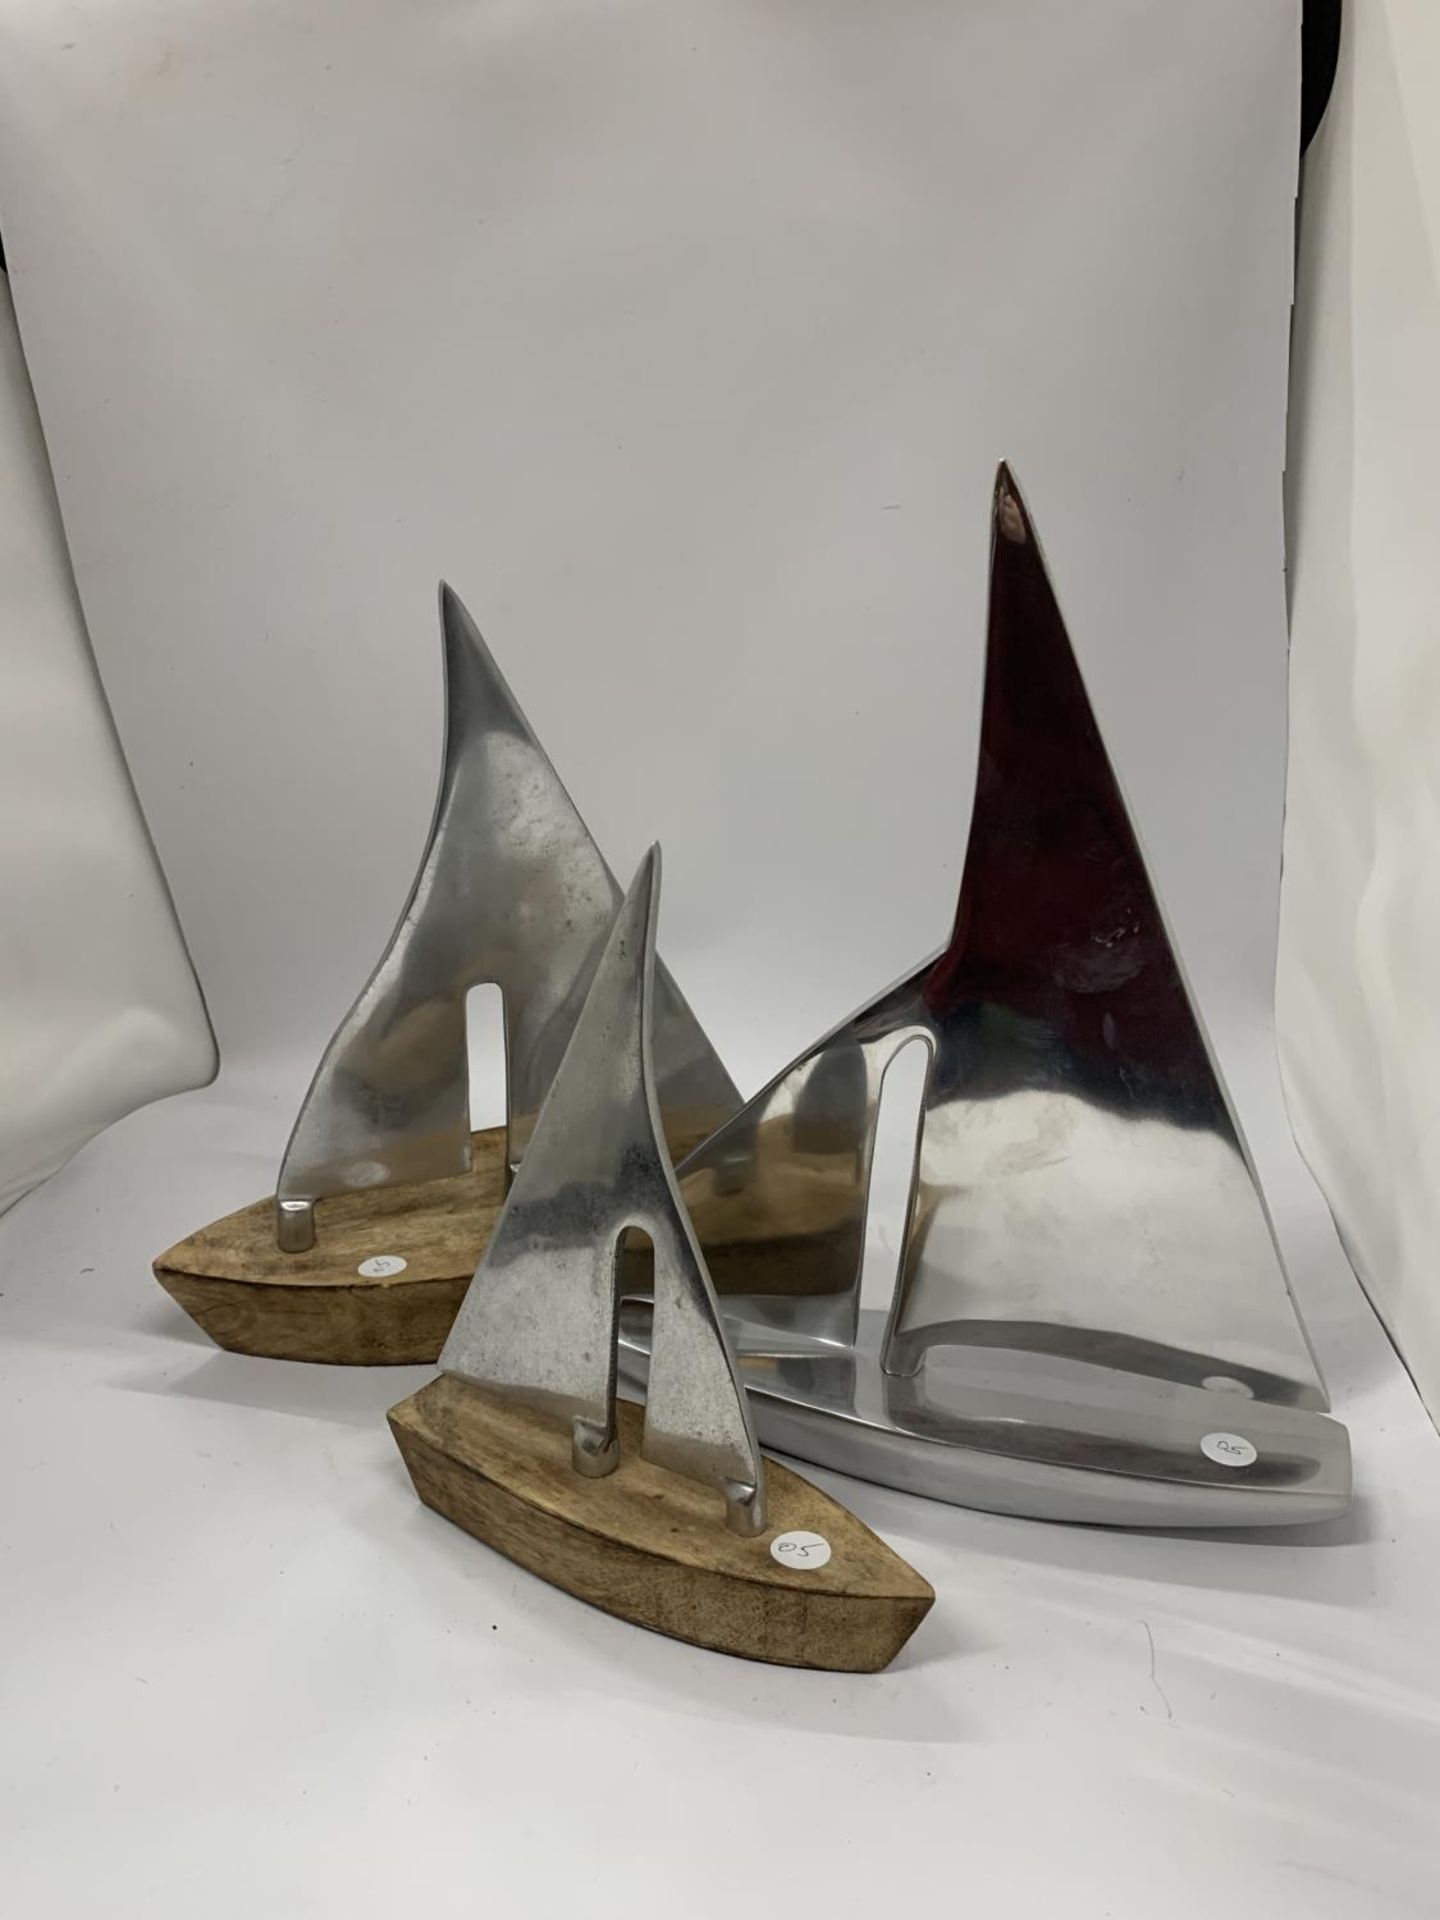 A COLLECTION OF THREE DANISH CHROME SHIP MODELS - Image 2 of 6